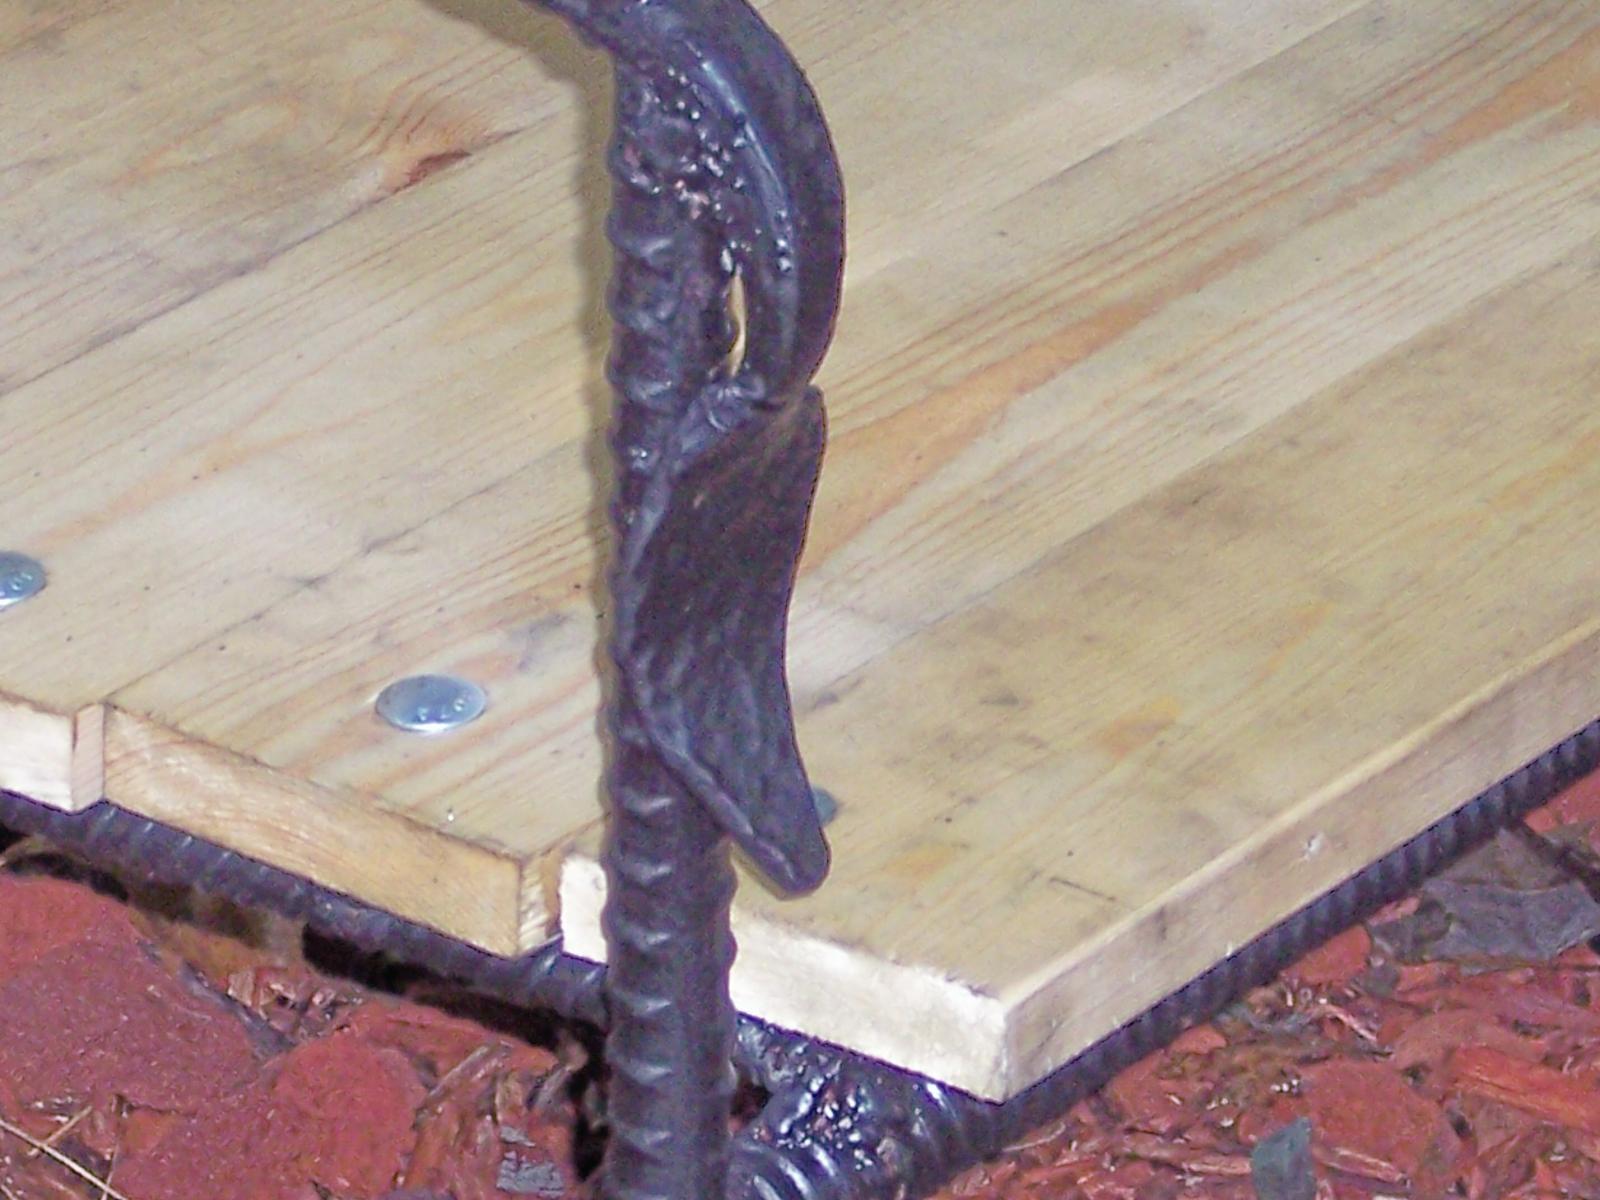 forged leaf on the bench arm rest